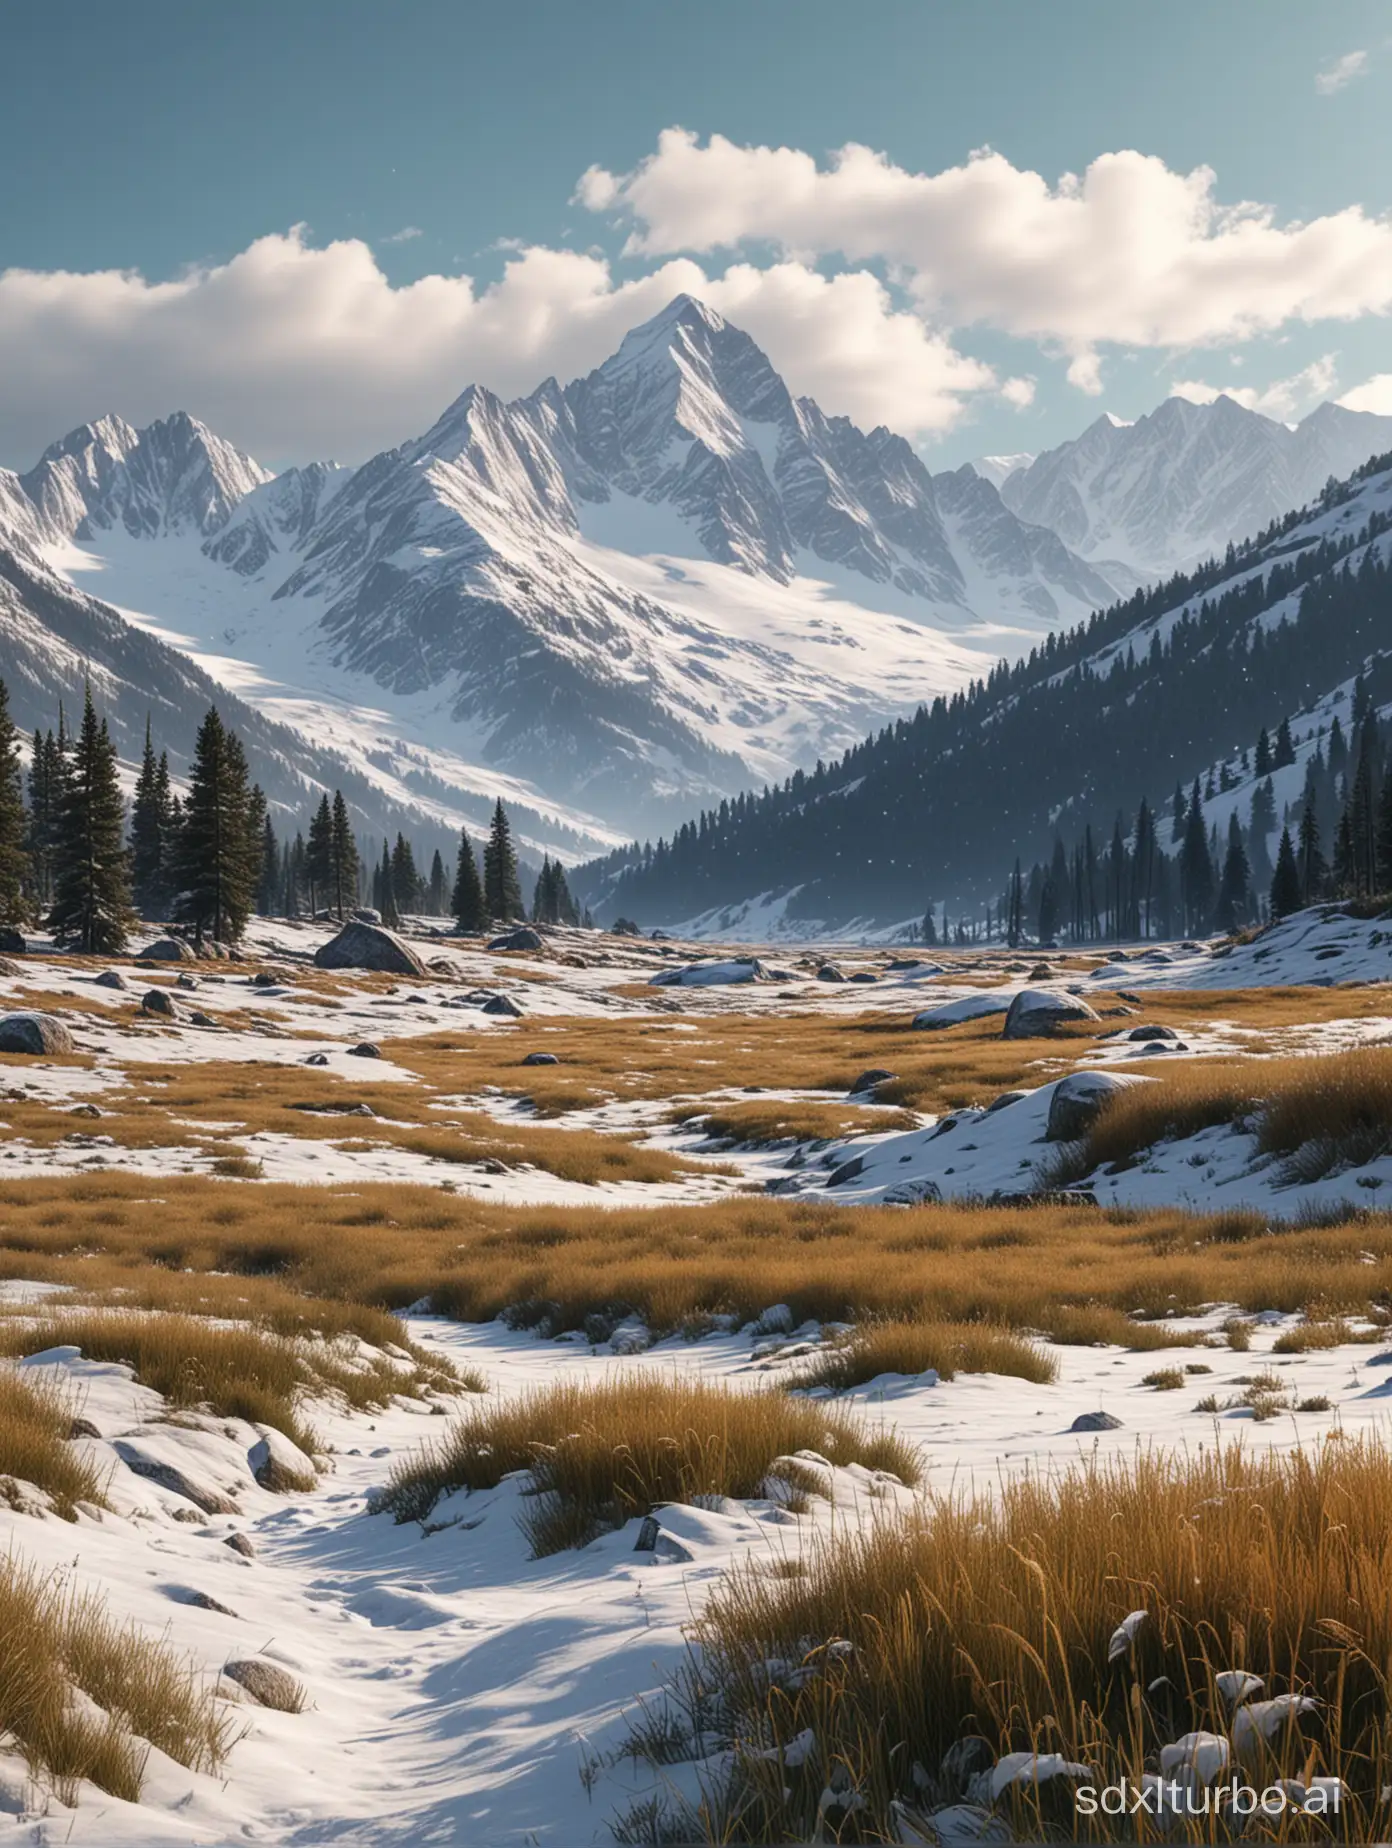 In the meadow in front of the snowy mountains，realistic